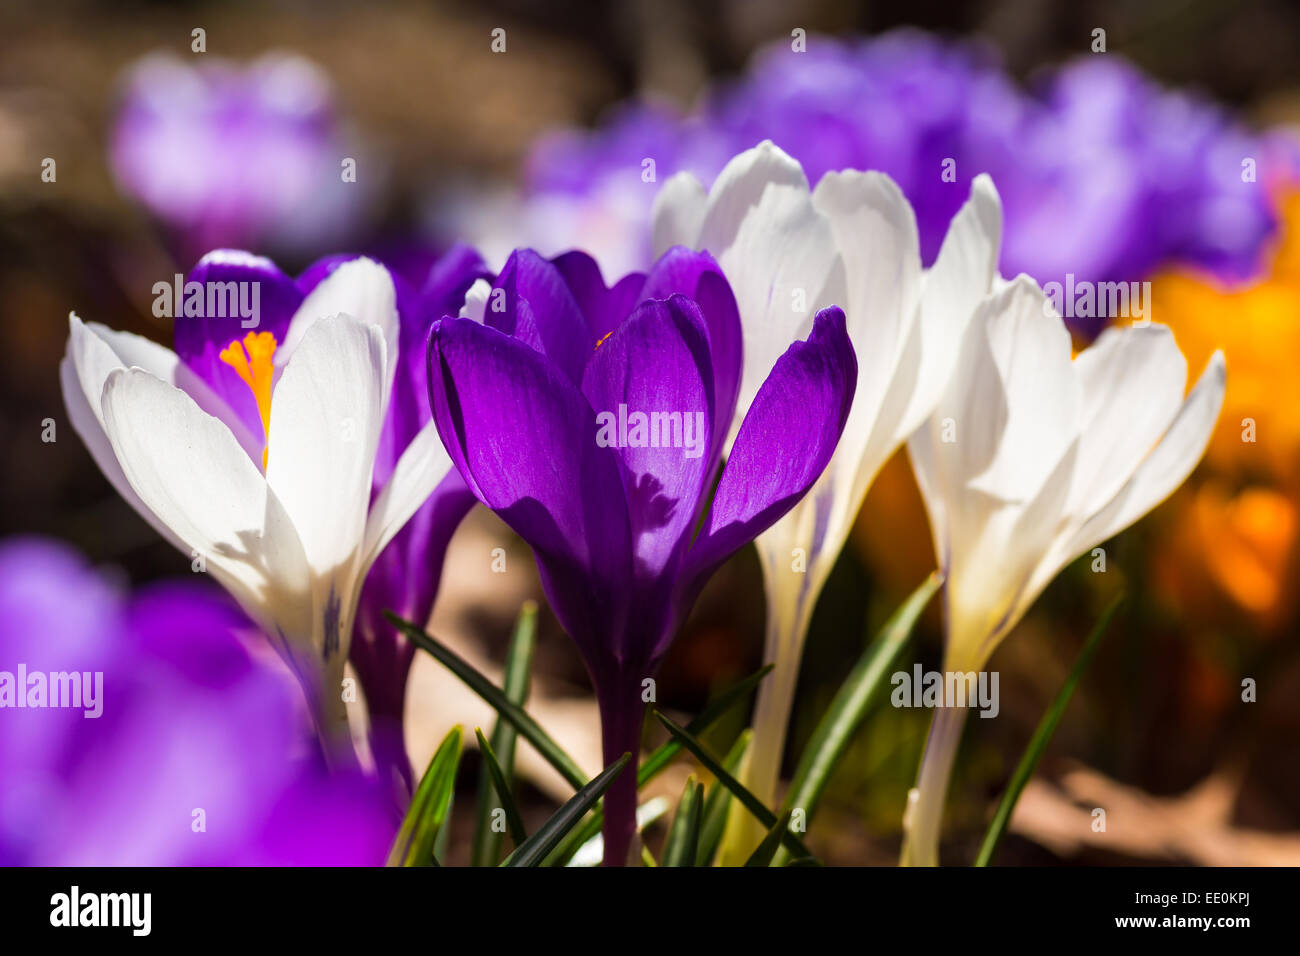 Crocus flowers in the early spring garden. Stock Photo